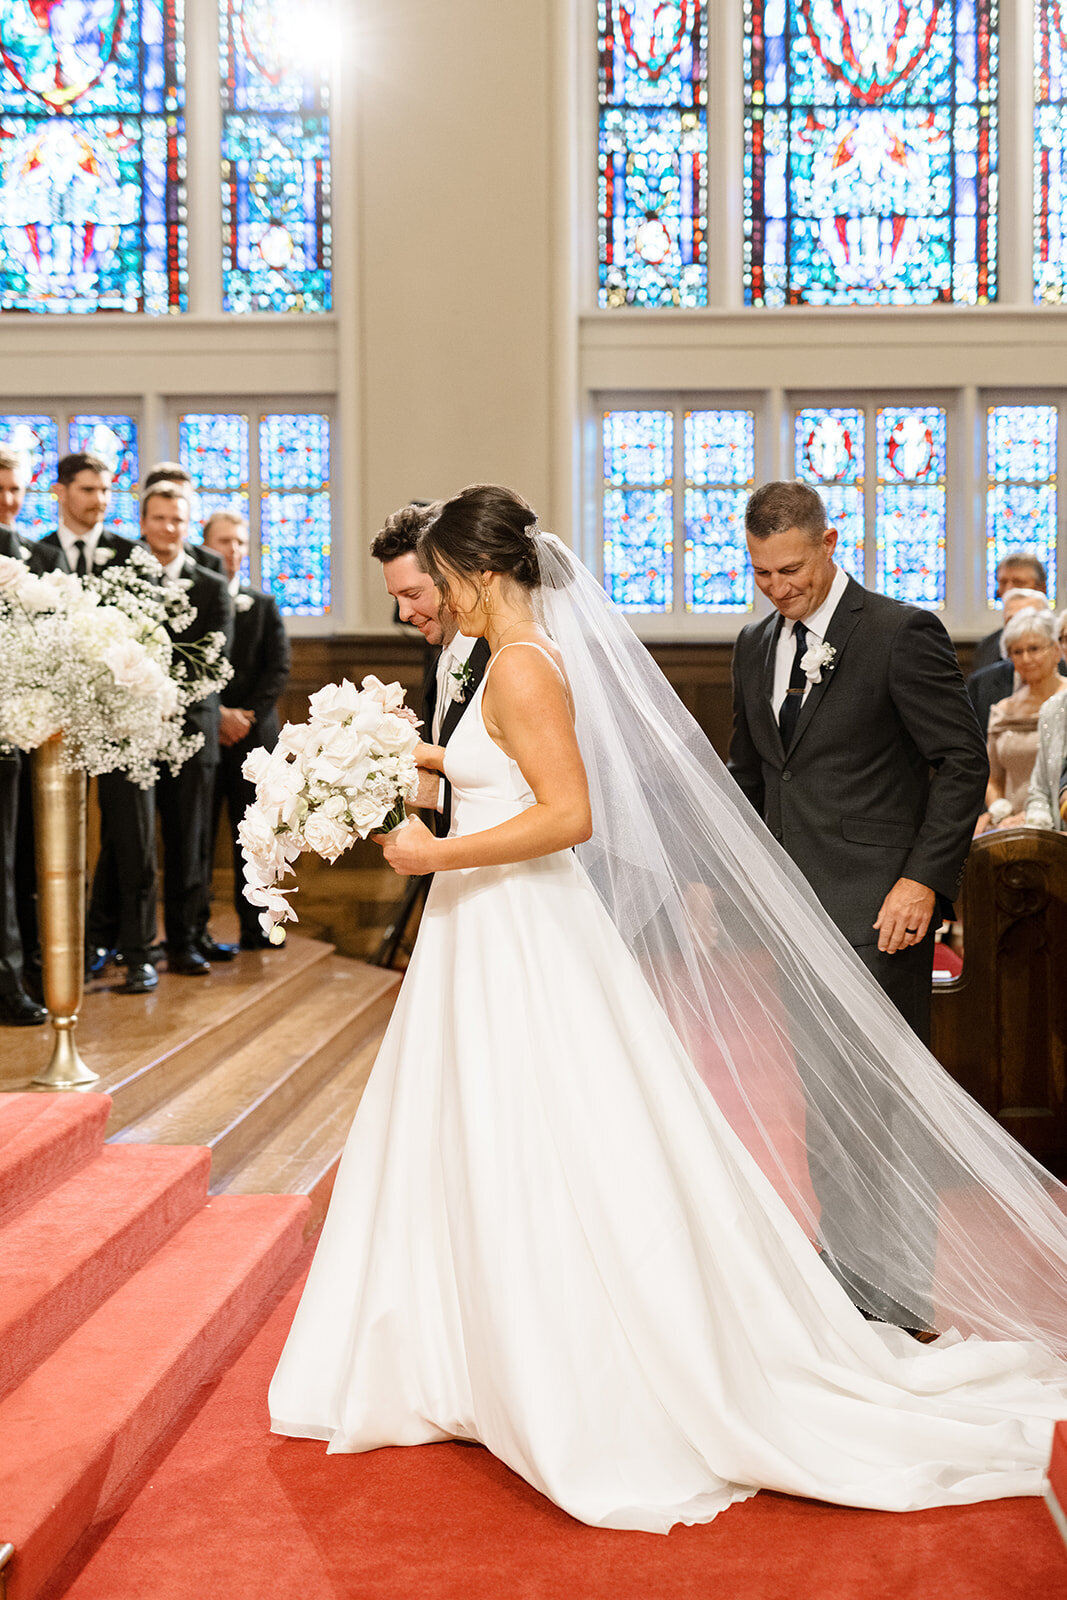 Kylie and Jack at The Grand Hall - Kansas City Wedding Photograpy - Nick and Lexie Photo Film-643